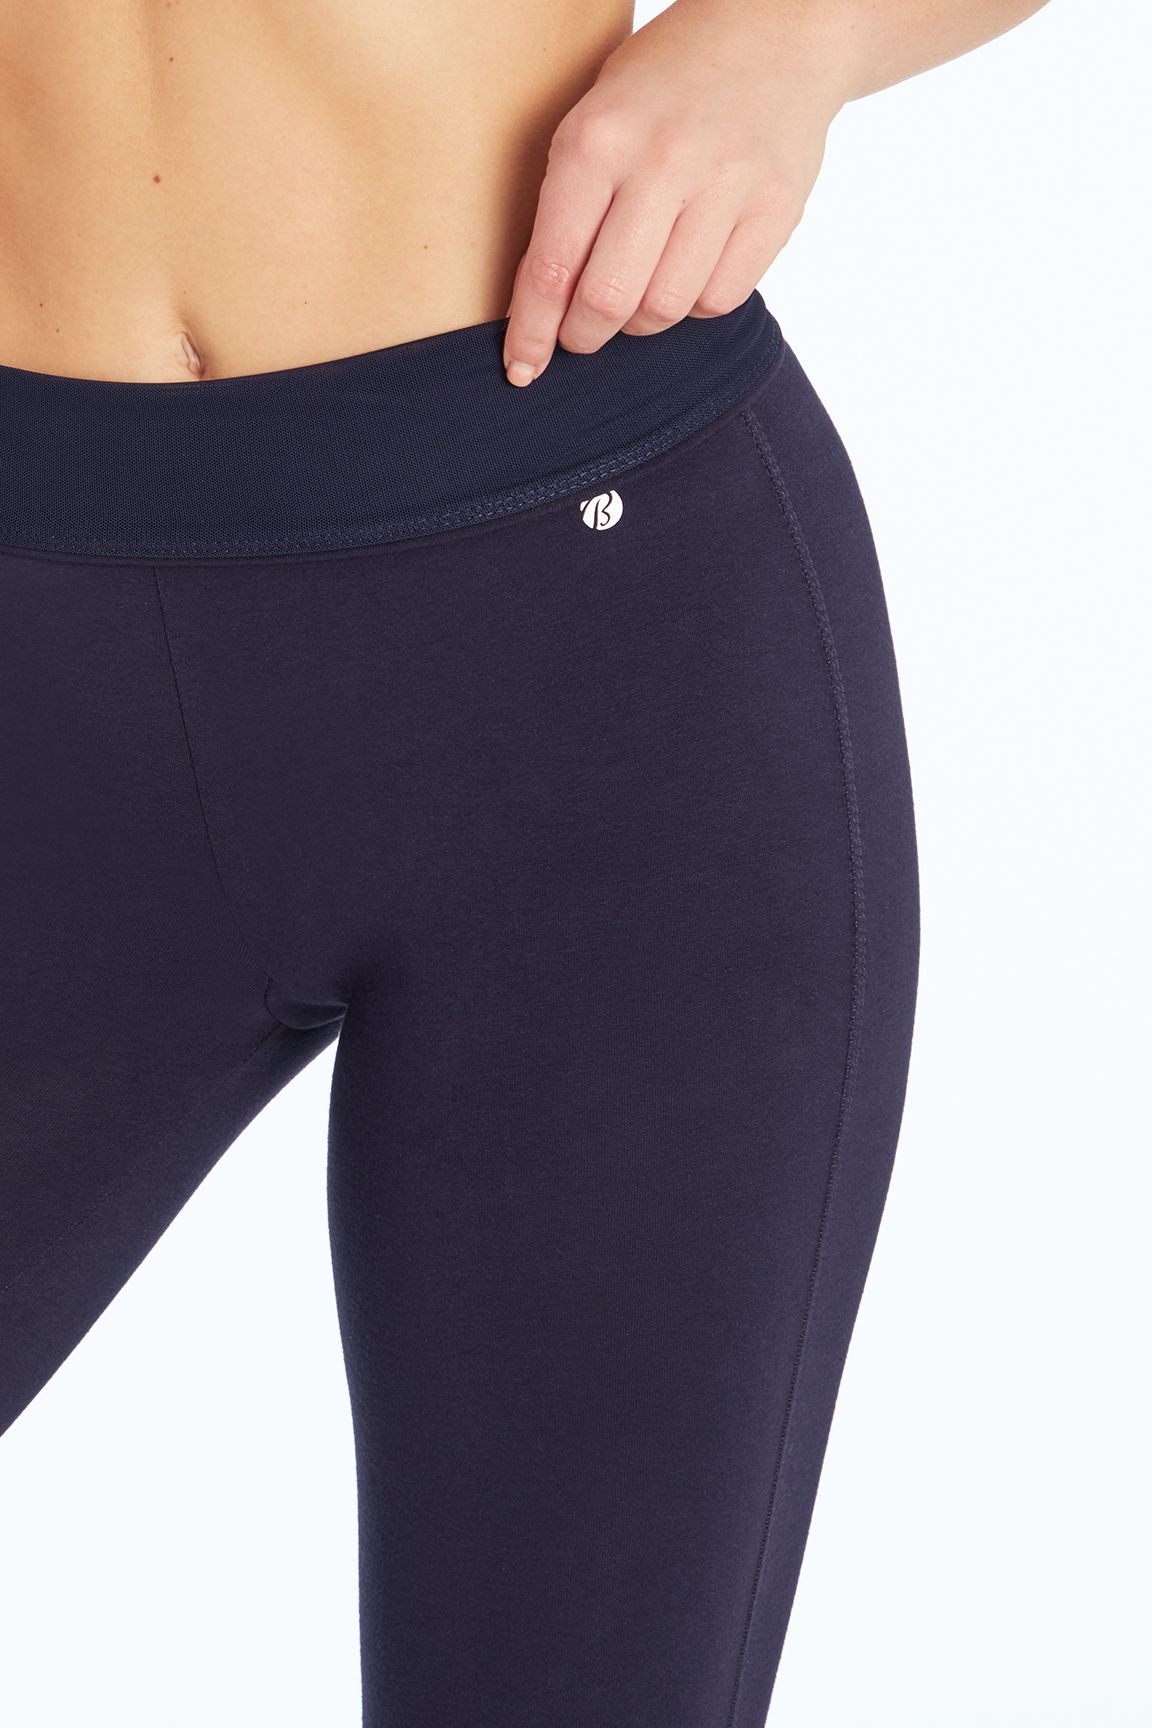 Bally Total Fitness Mid Rise Tummy Control Legging, Midnight Blue